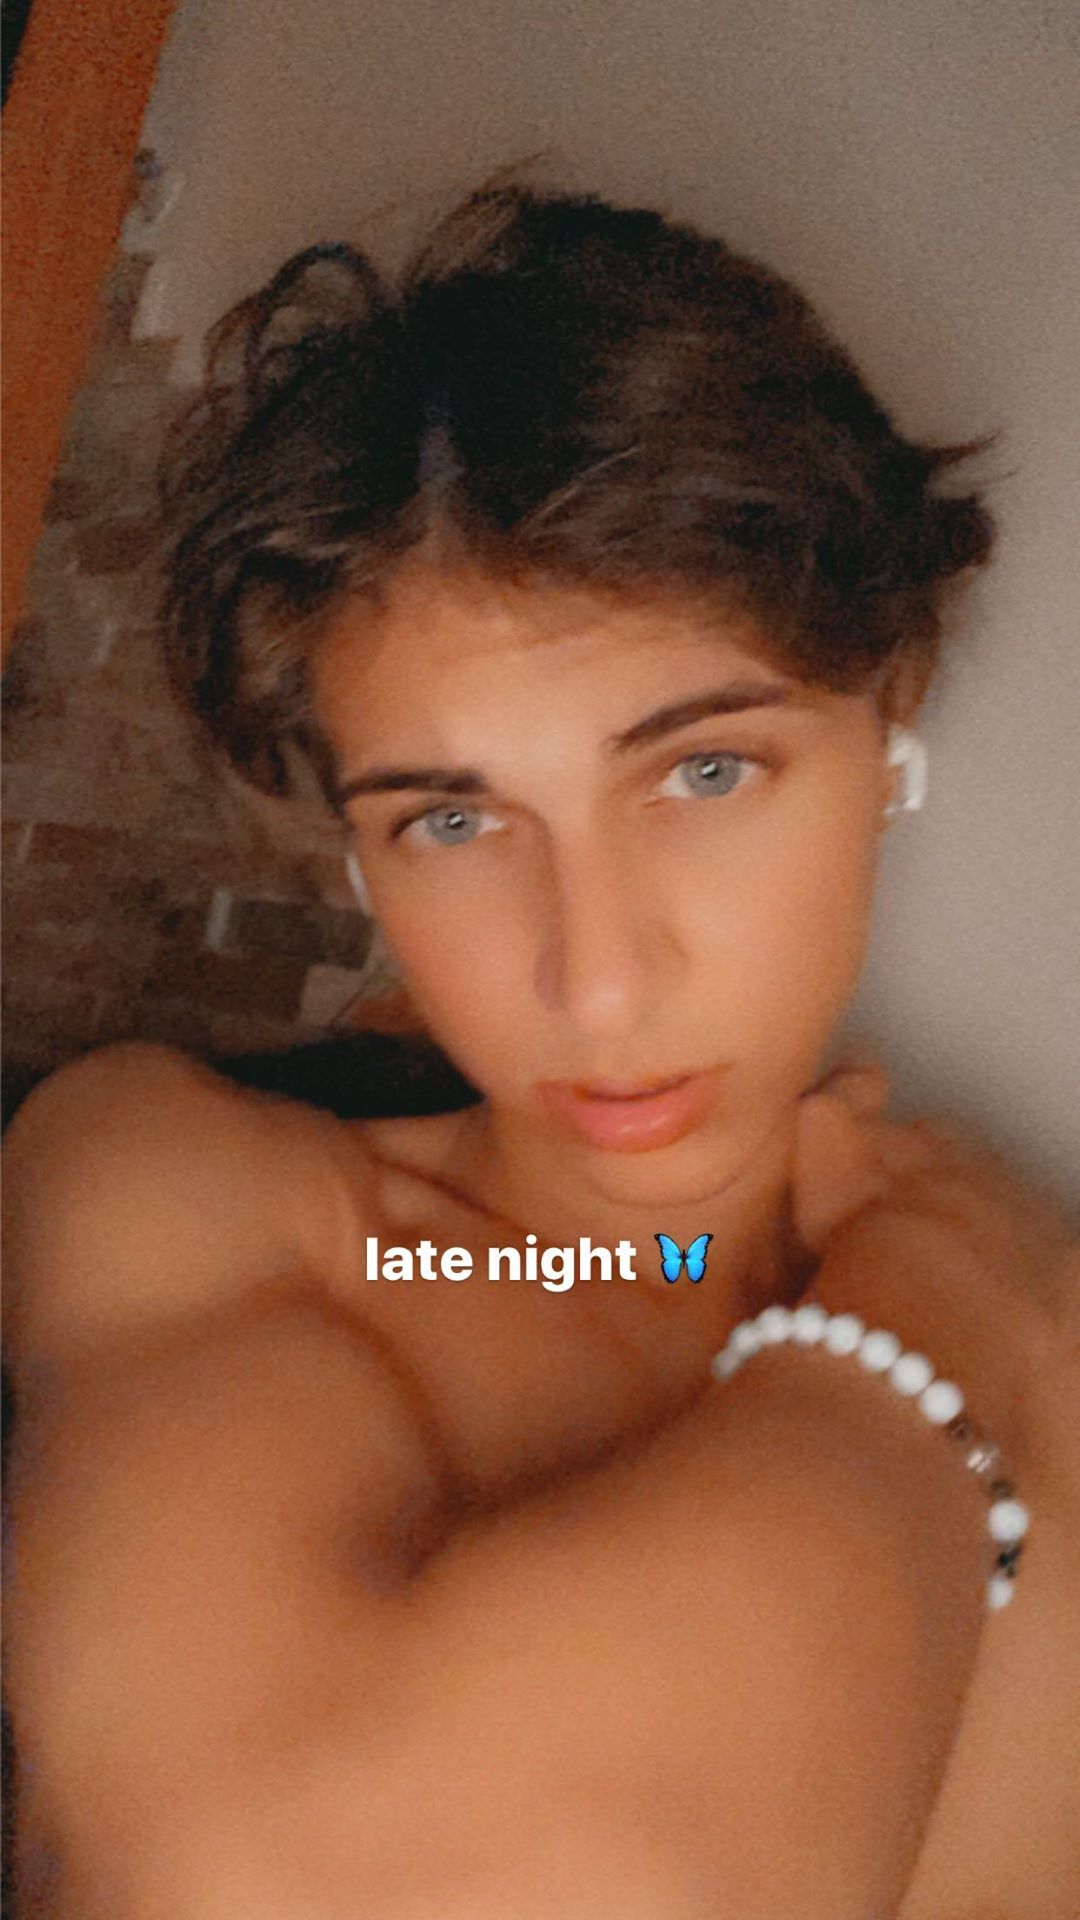 General photo of Lukas Rieger